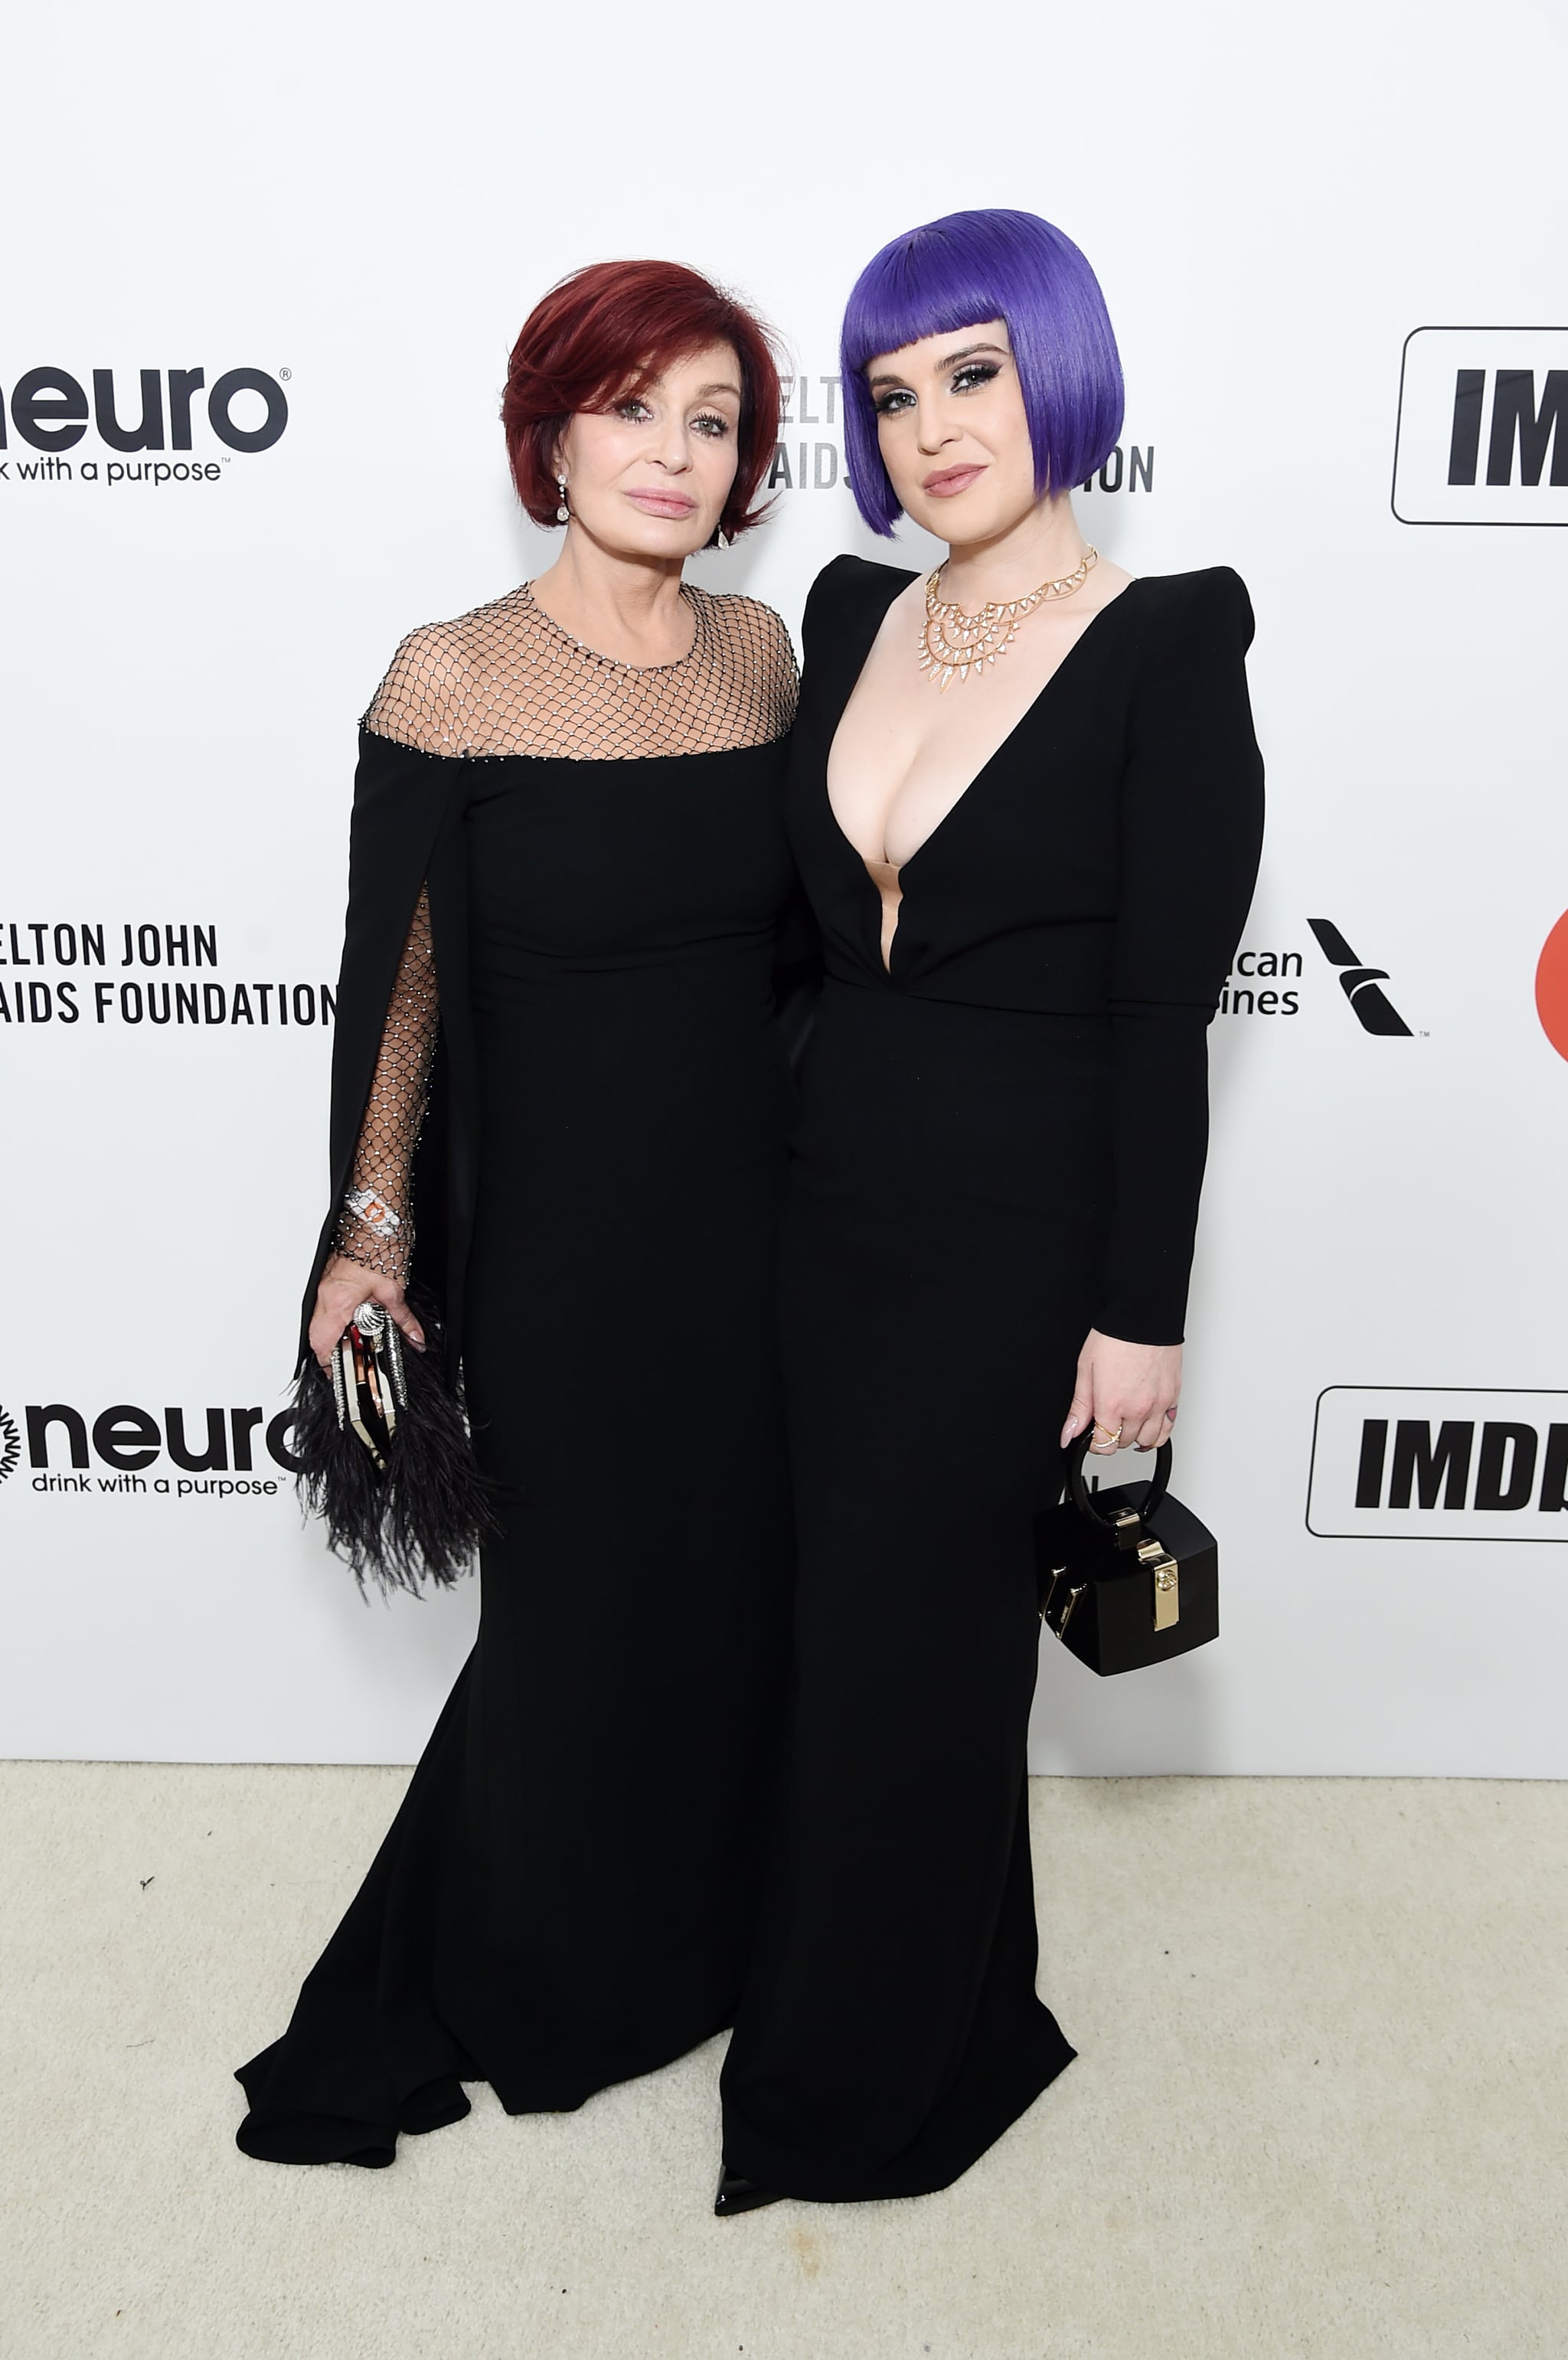 WEST HOLLYWOOD, CALIFORNIA - FEBRUARY 09: (L-R) Sharon Osbourne and Kelly Osbourne attend the 28th Annual Elton John AIDS Foundation Academy Awards Viewing Party sponsored by IMDb, Neuro Drinks and Walmart on February 09, 2020 in West Hollywood, California. (Photo by Jamie McCarthy/Getty Images for EJAF)